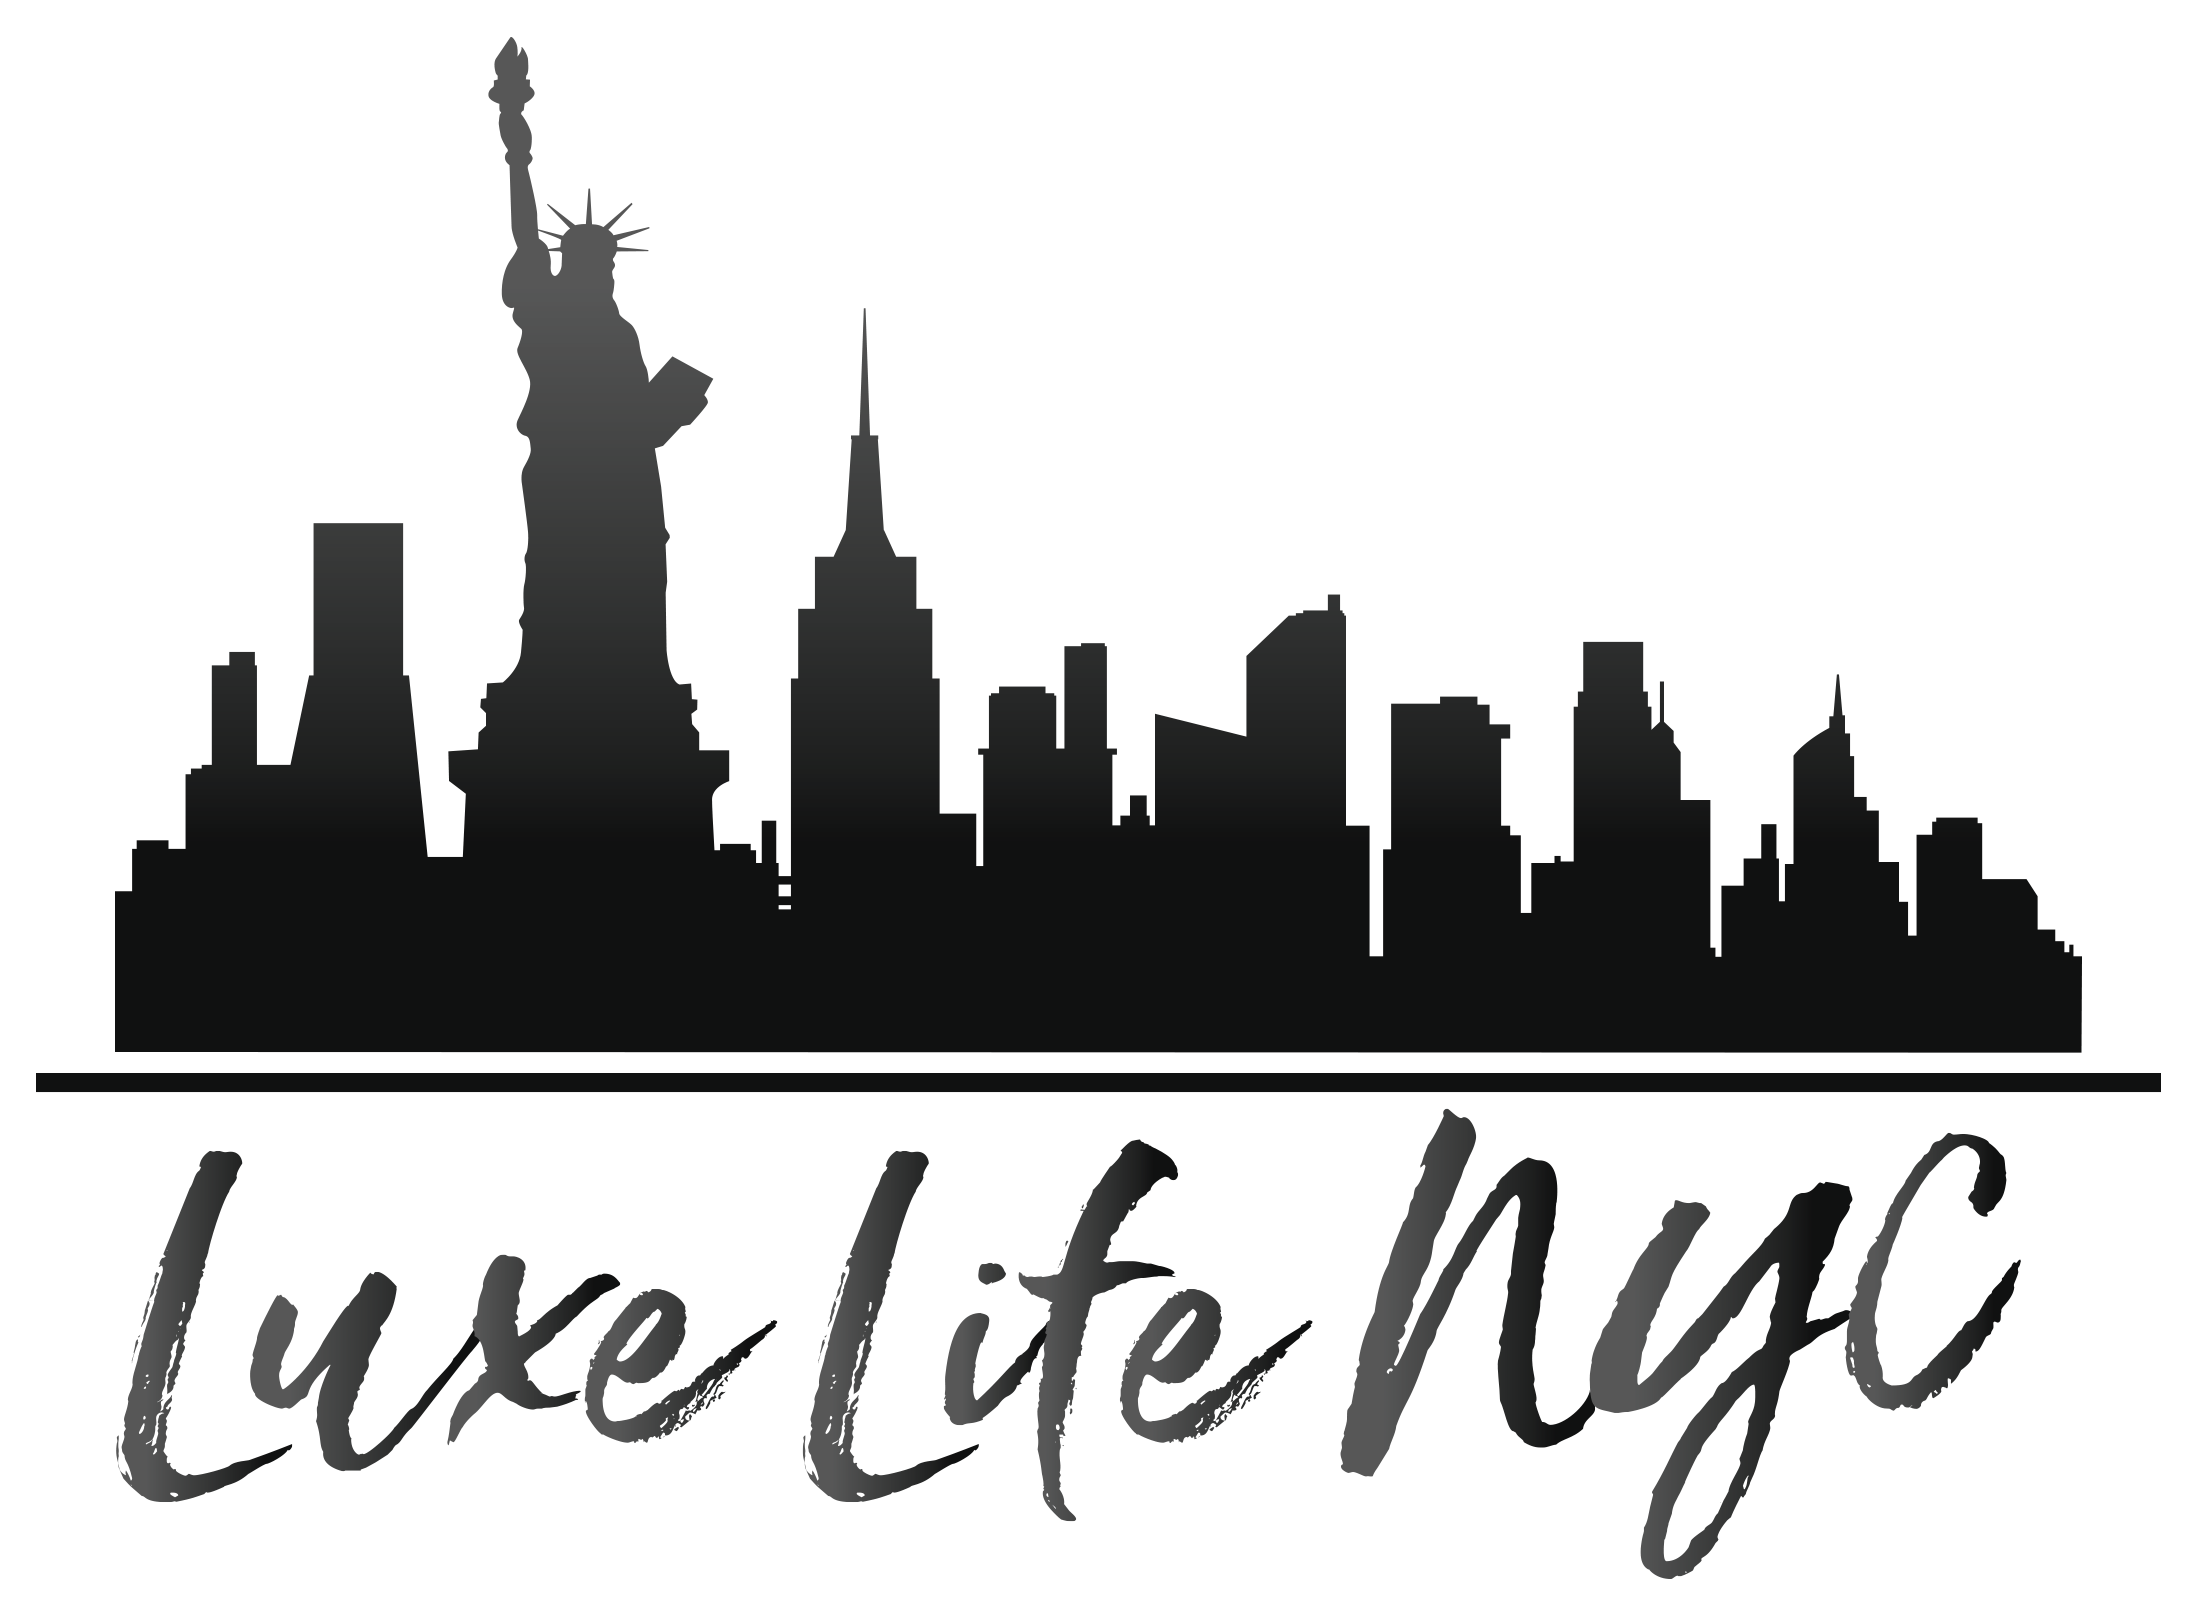 Luxe Life NYC